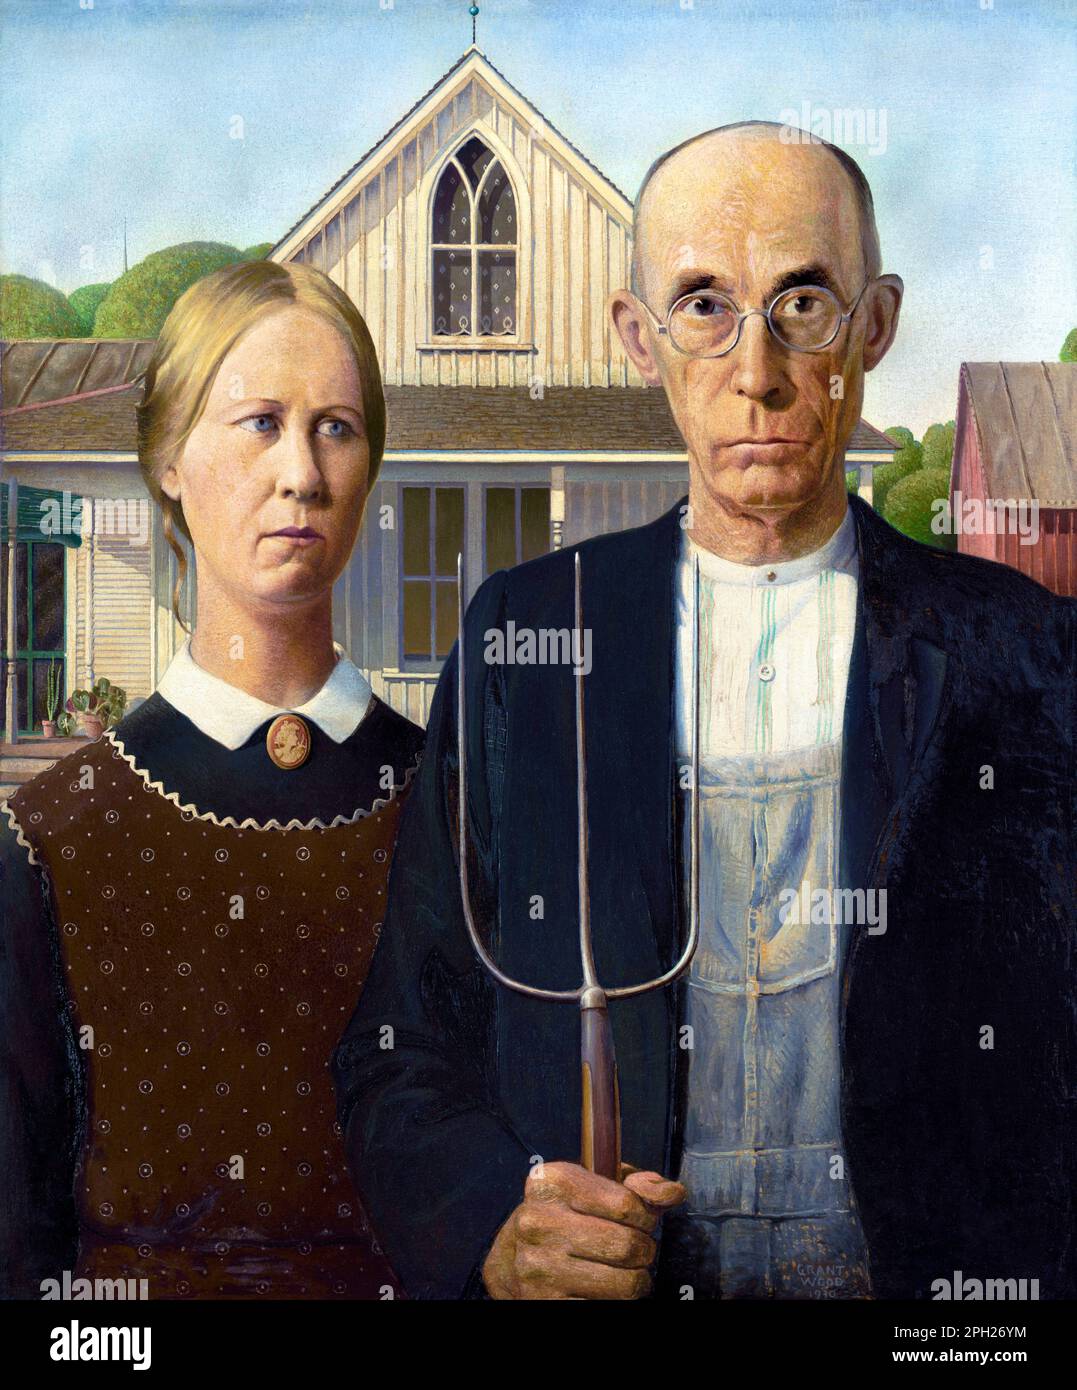 Grant Wood's American Gothic (1930) famous painting. Stock Photo